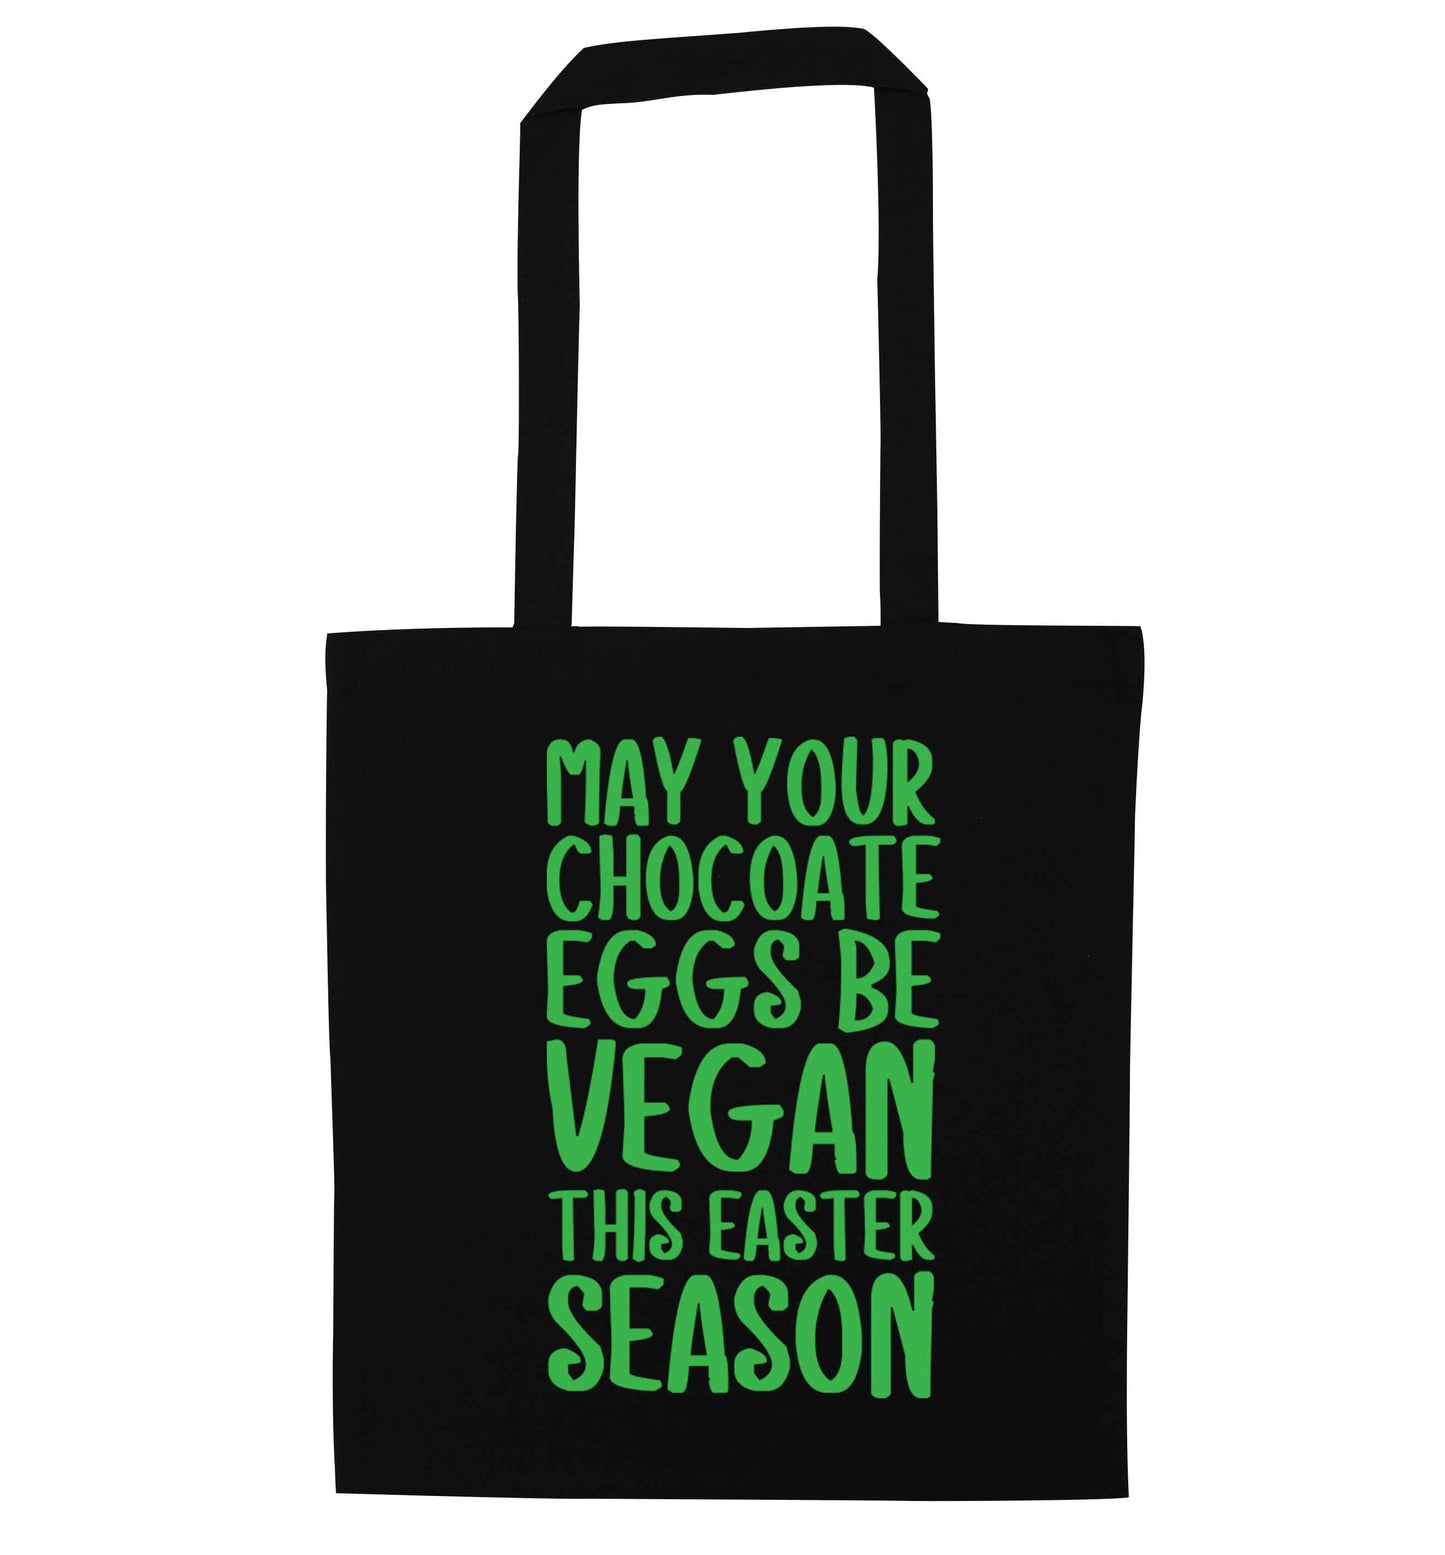 Easter bunny approved! Vegans will love this easter themed black tote bag